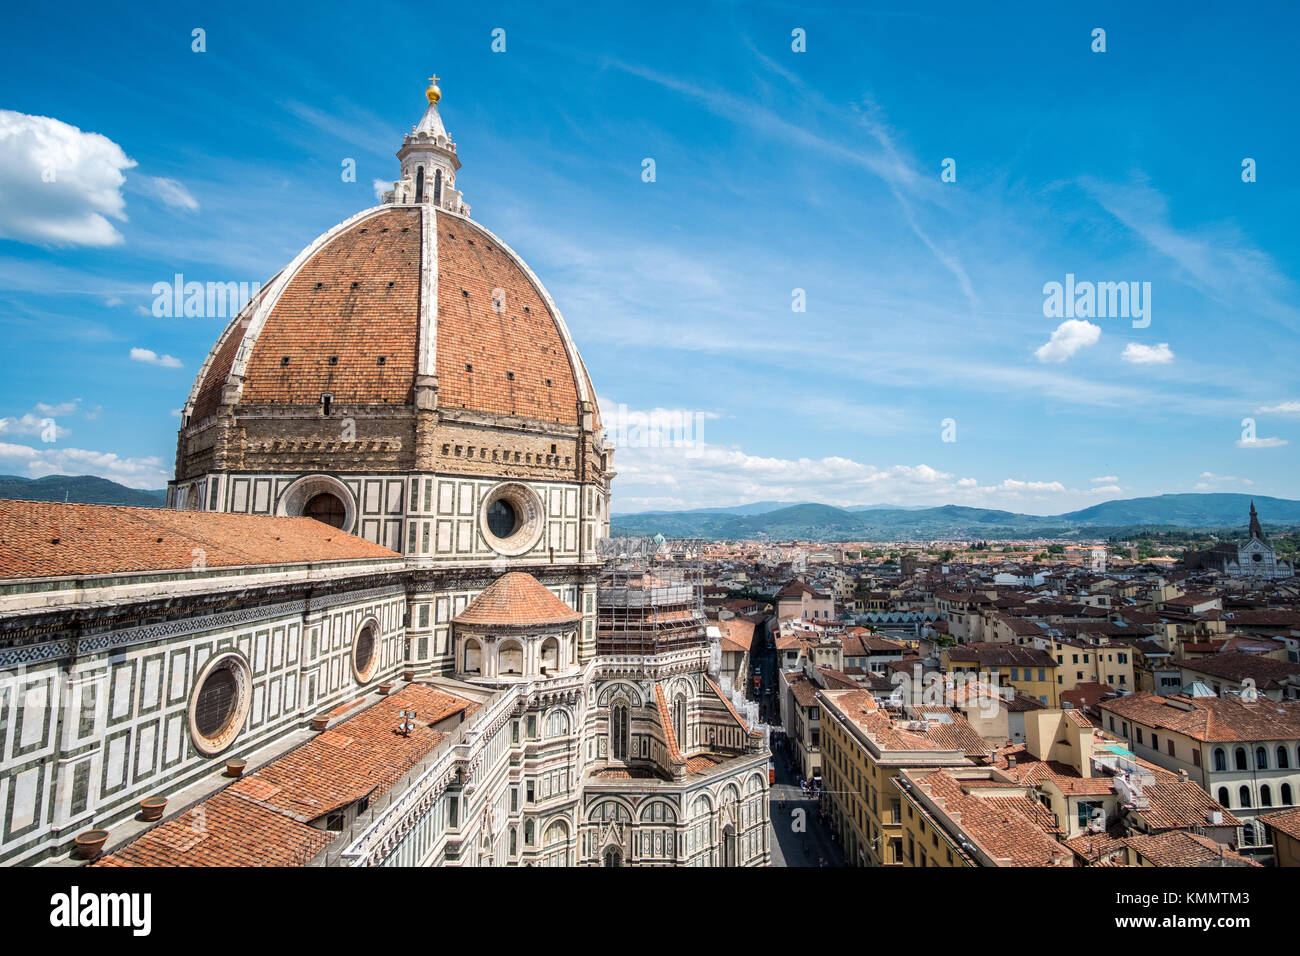 Aerial view of Florence, Italy Stock Photo